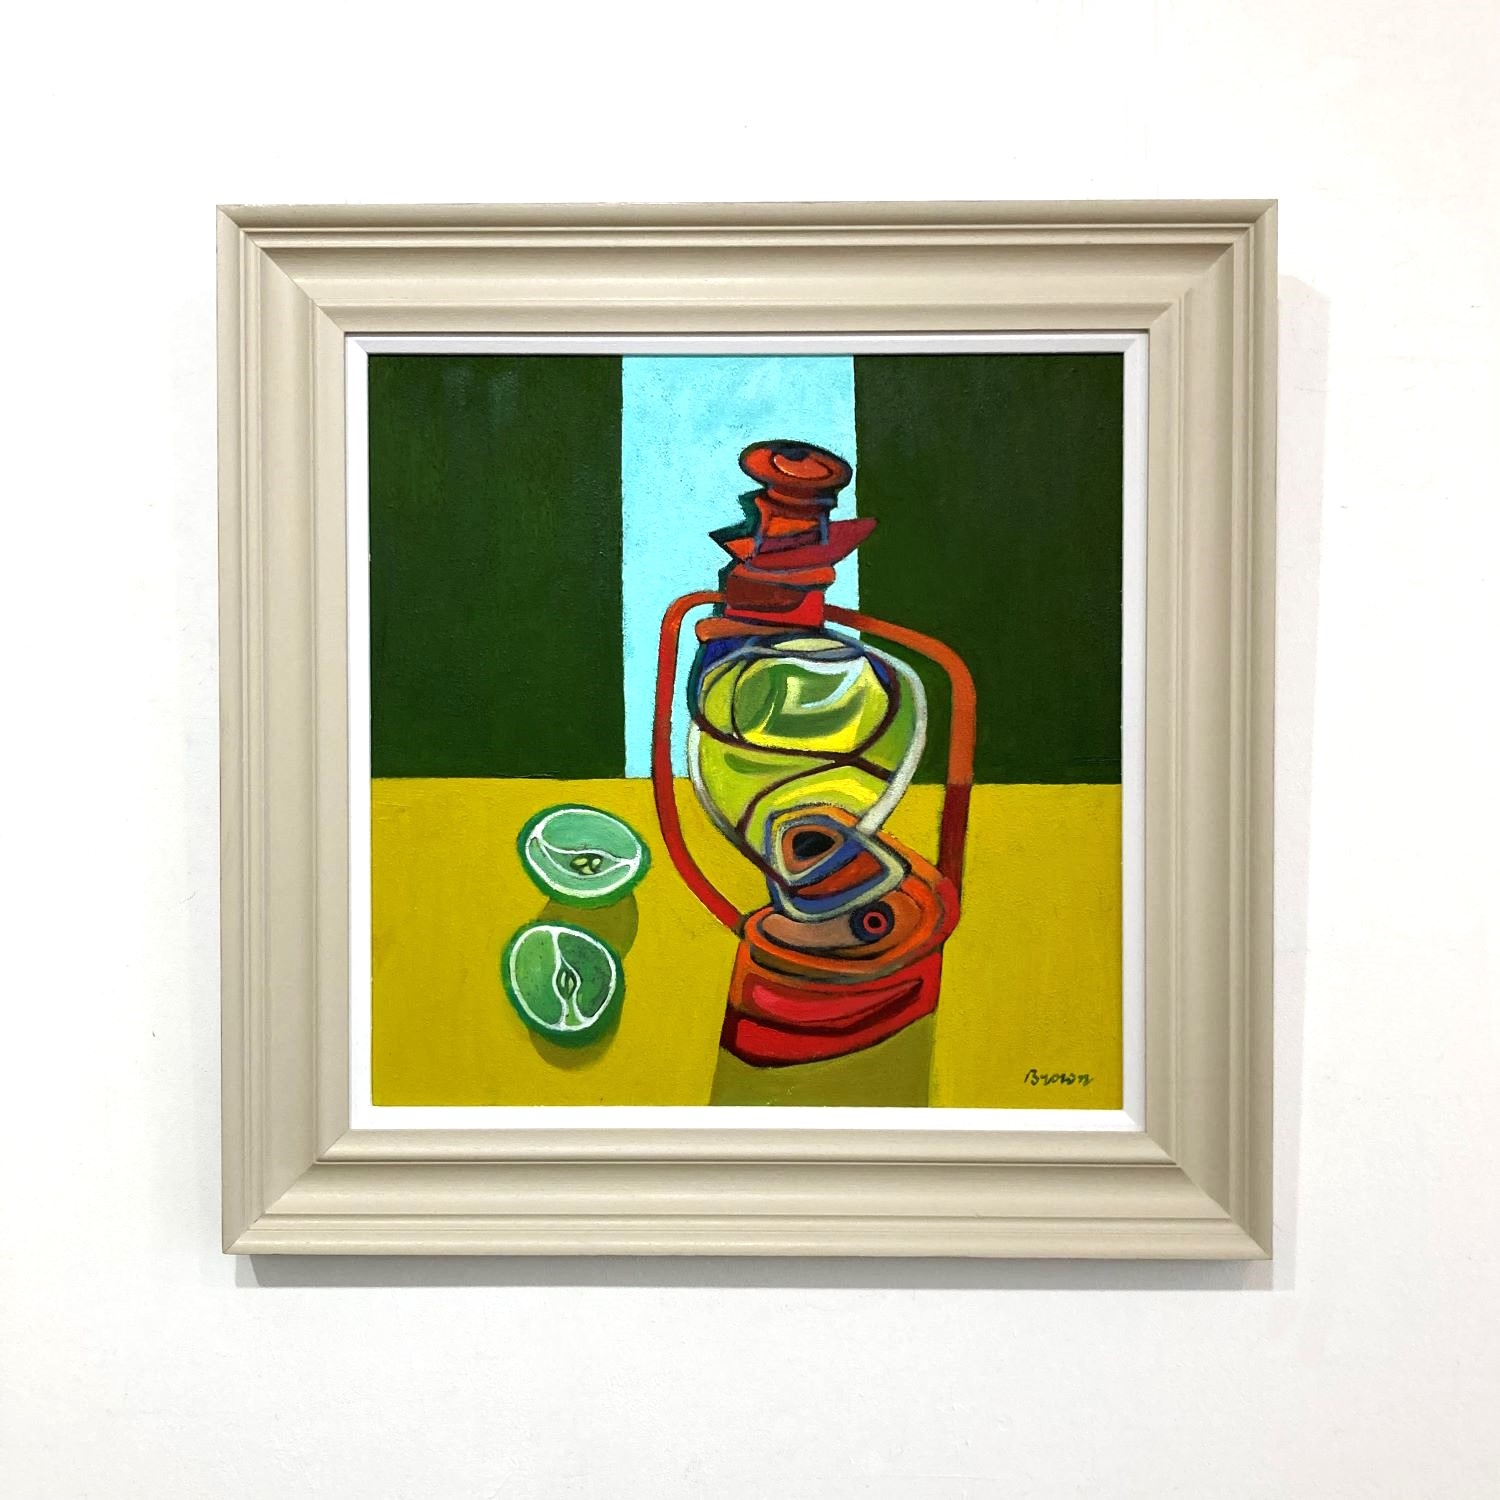 'Red Lamp and Limes' by artist Davy Brown